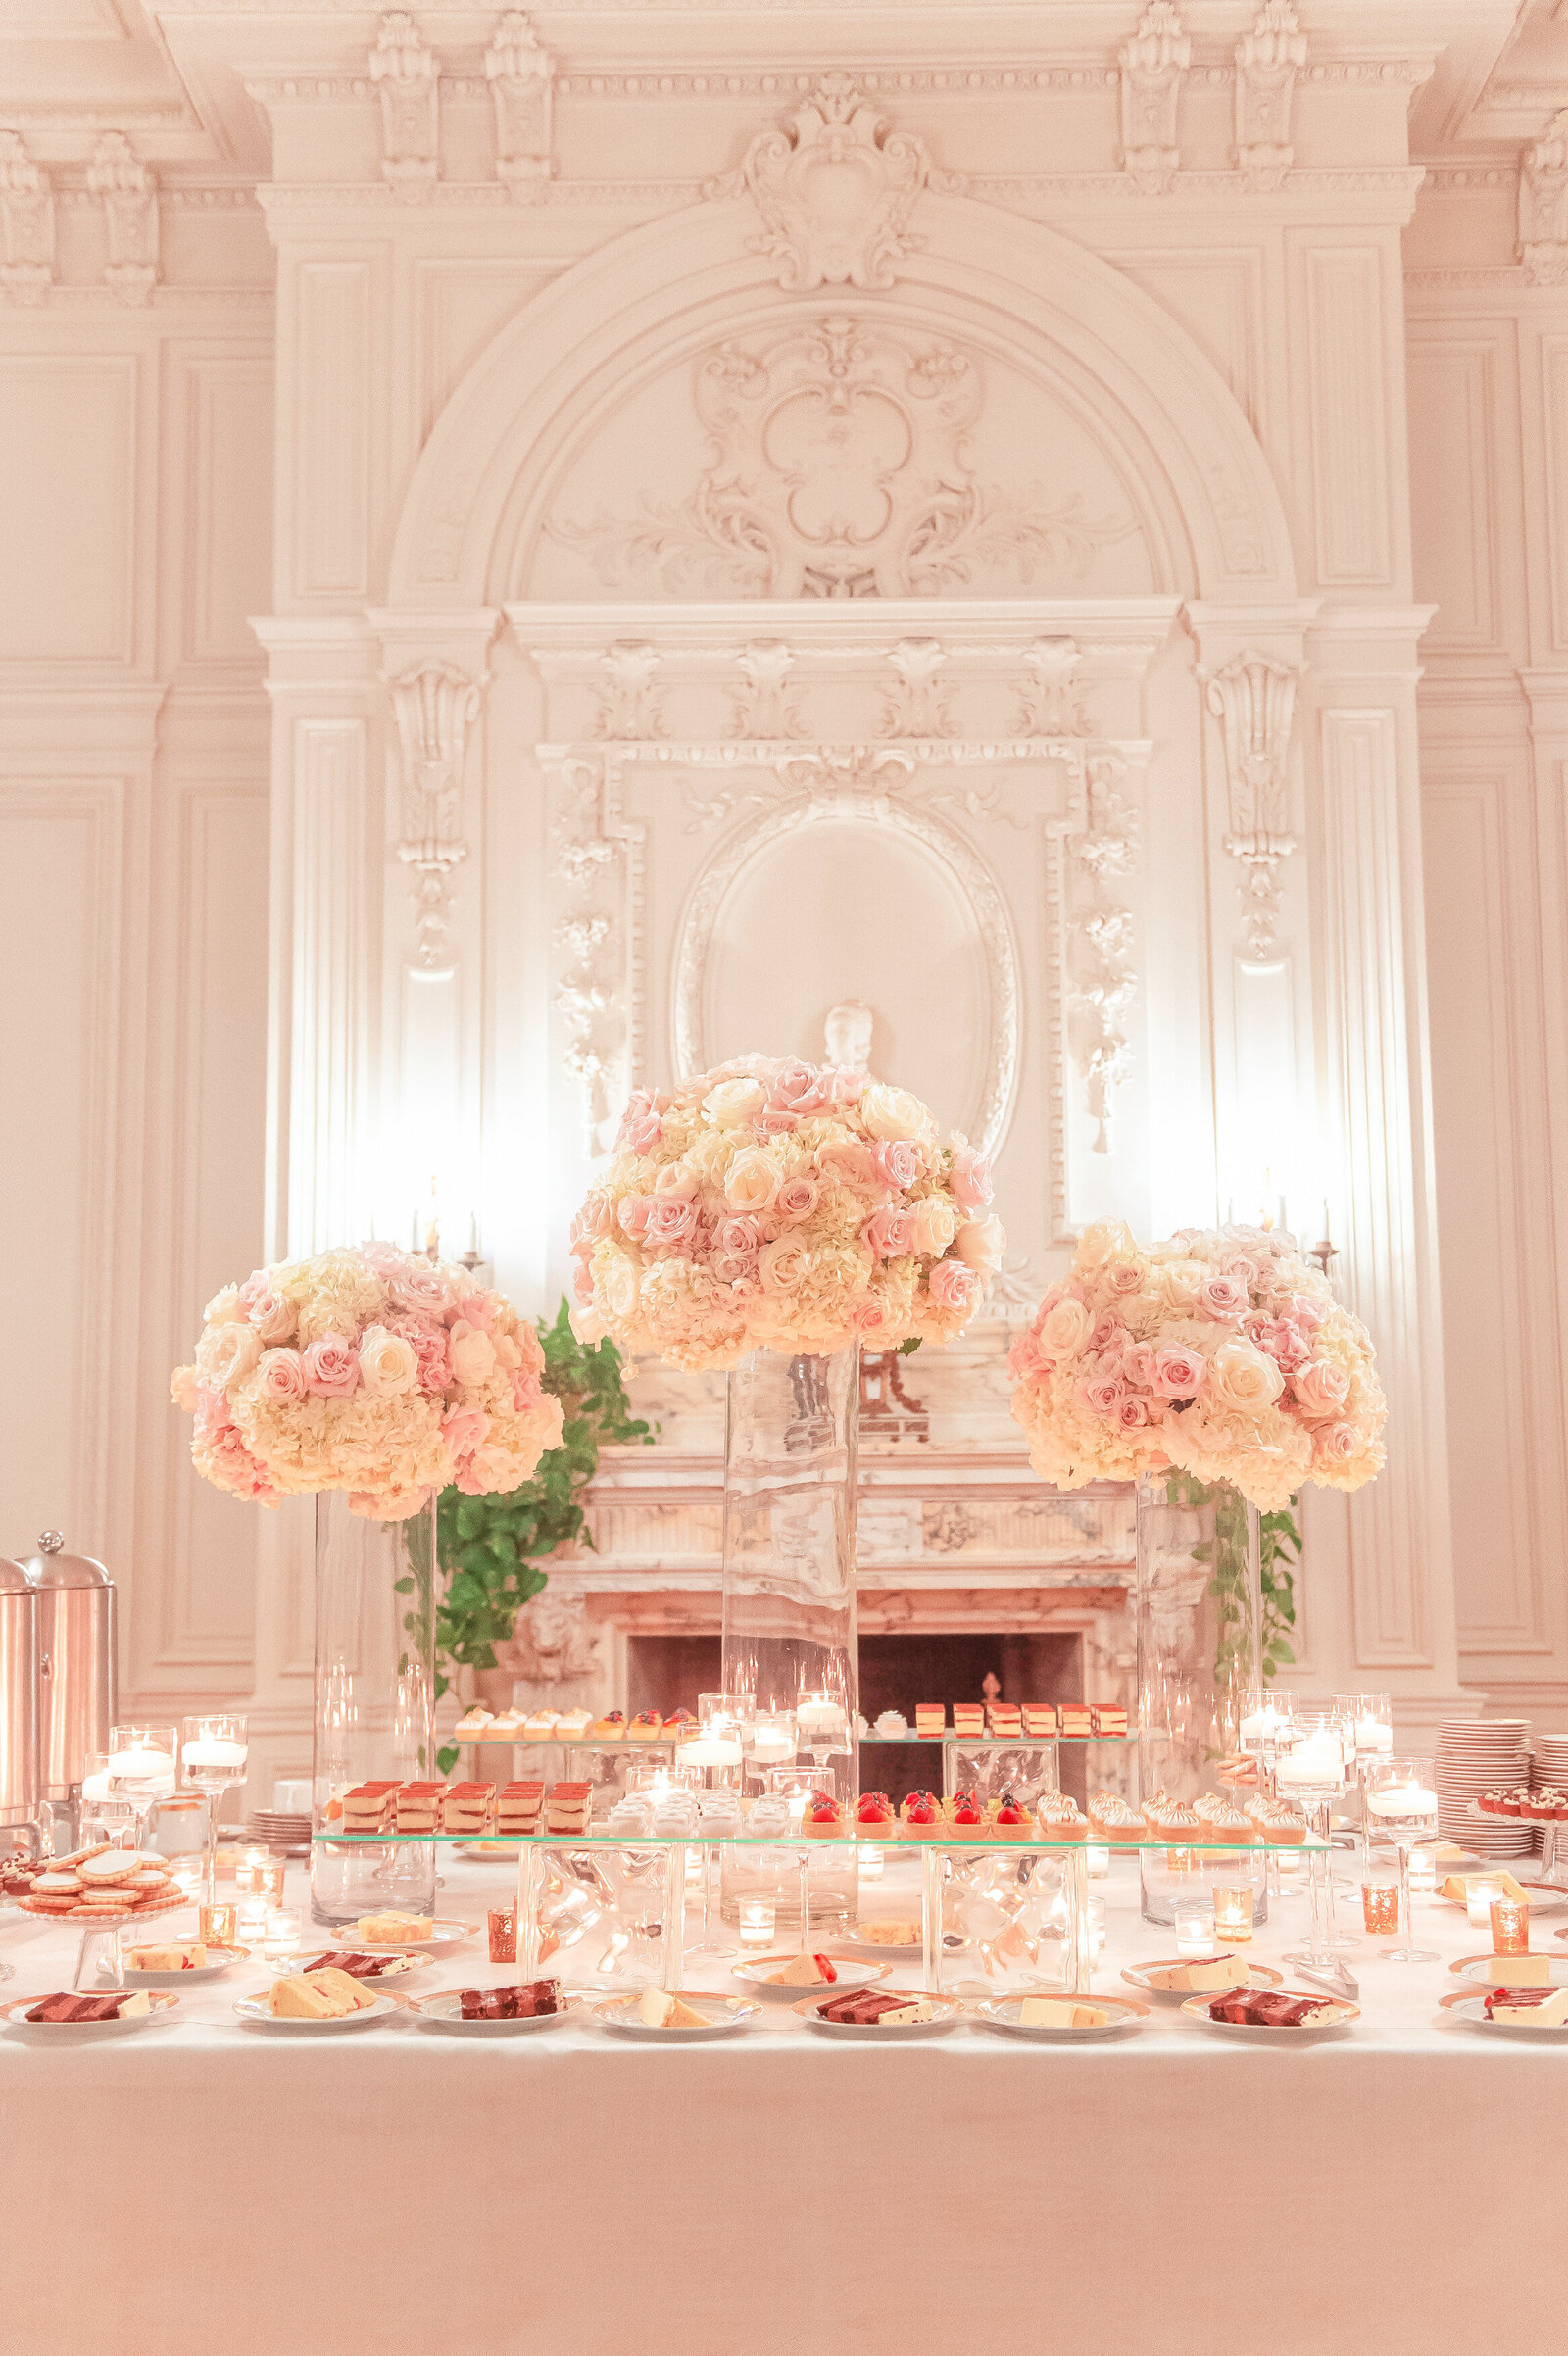 Wedding reception table with candles and large pink floral centerpieces